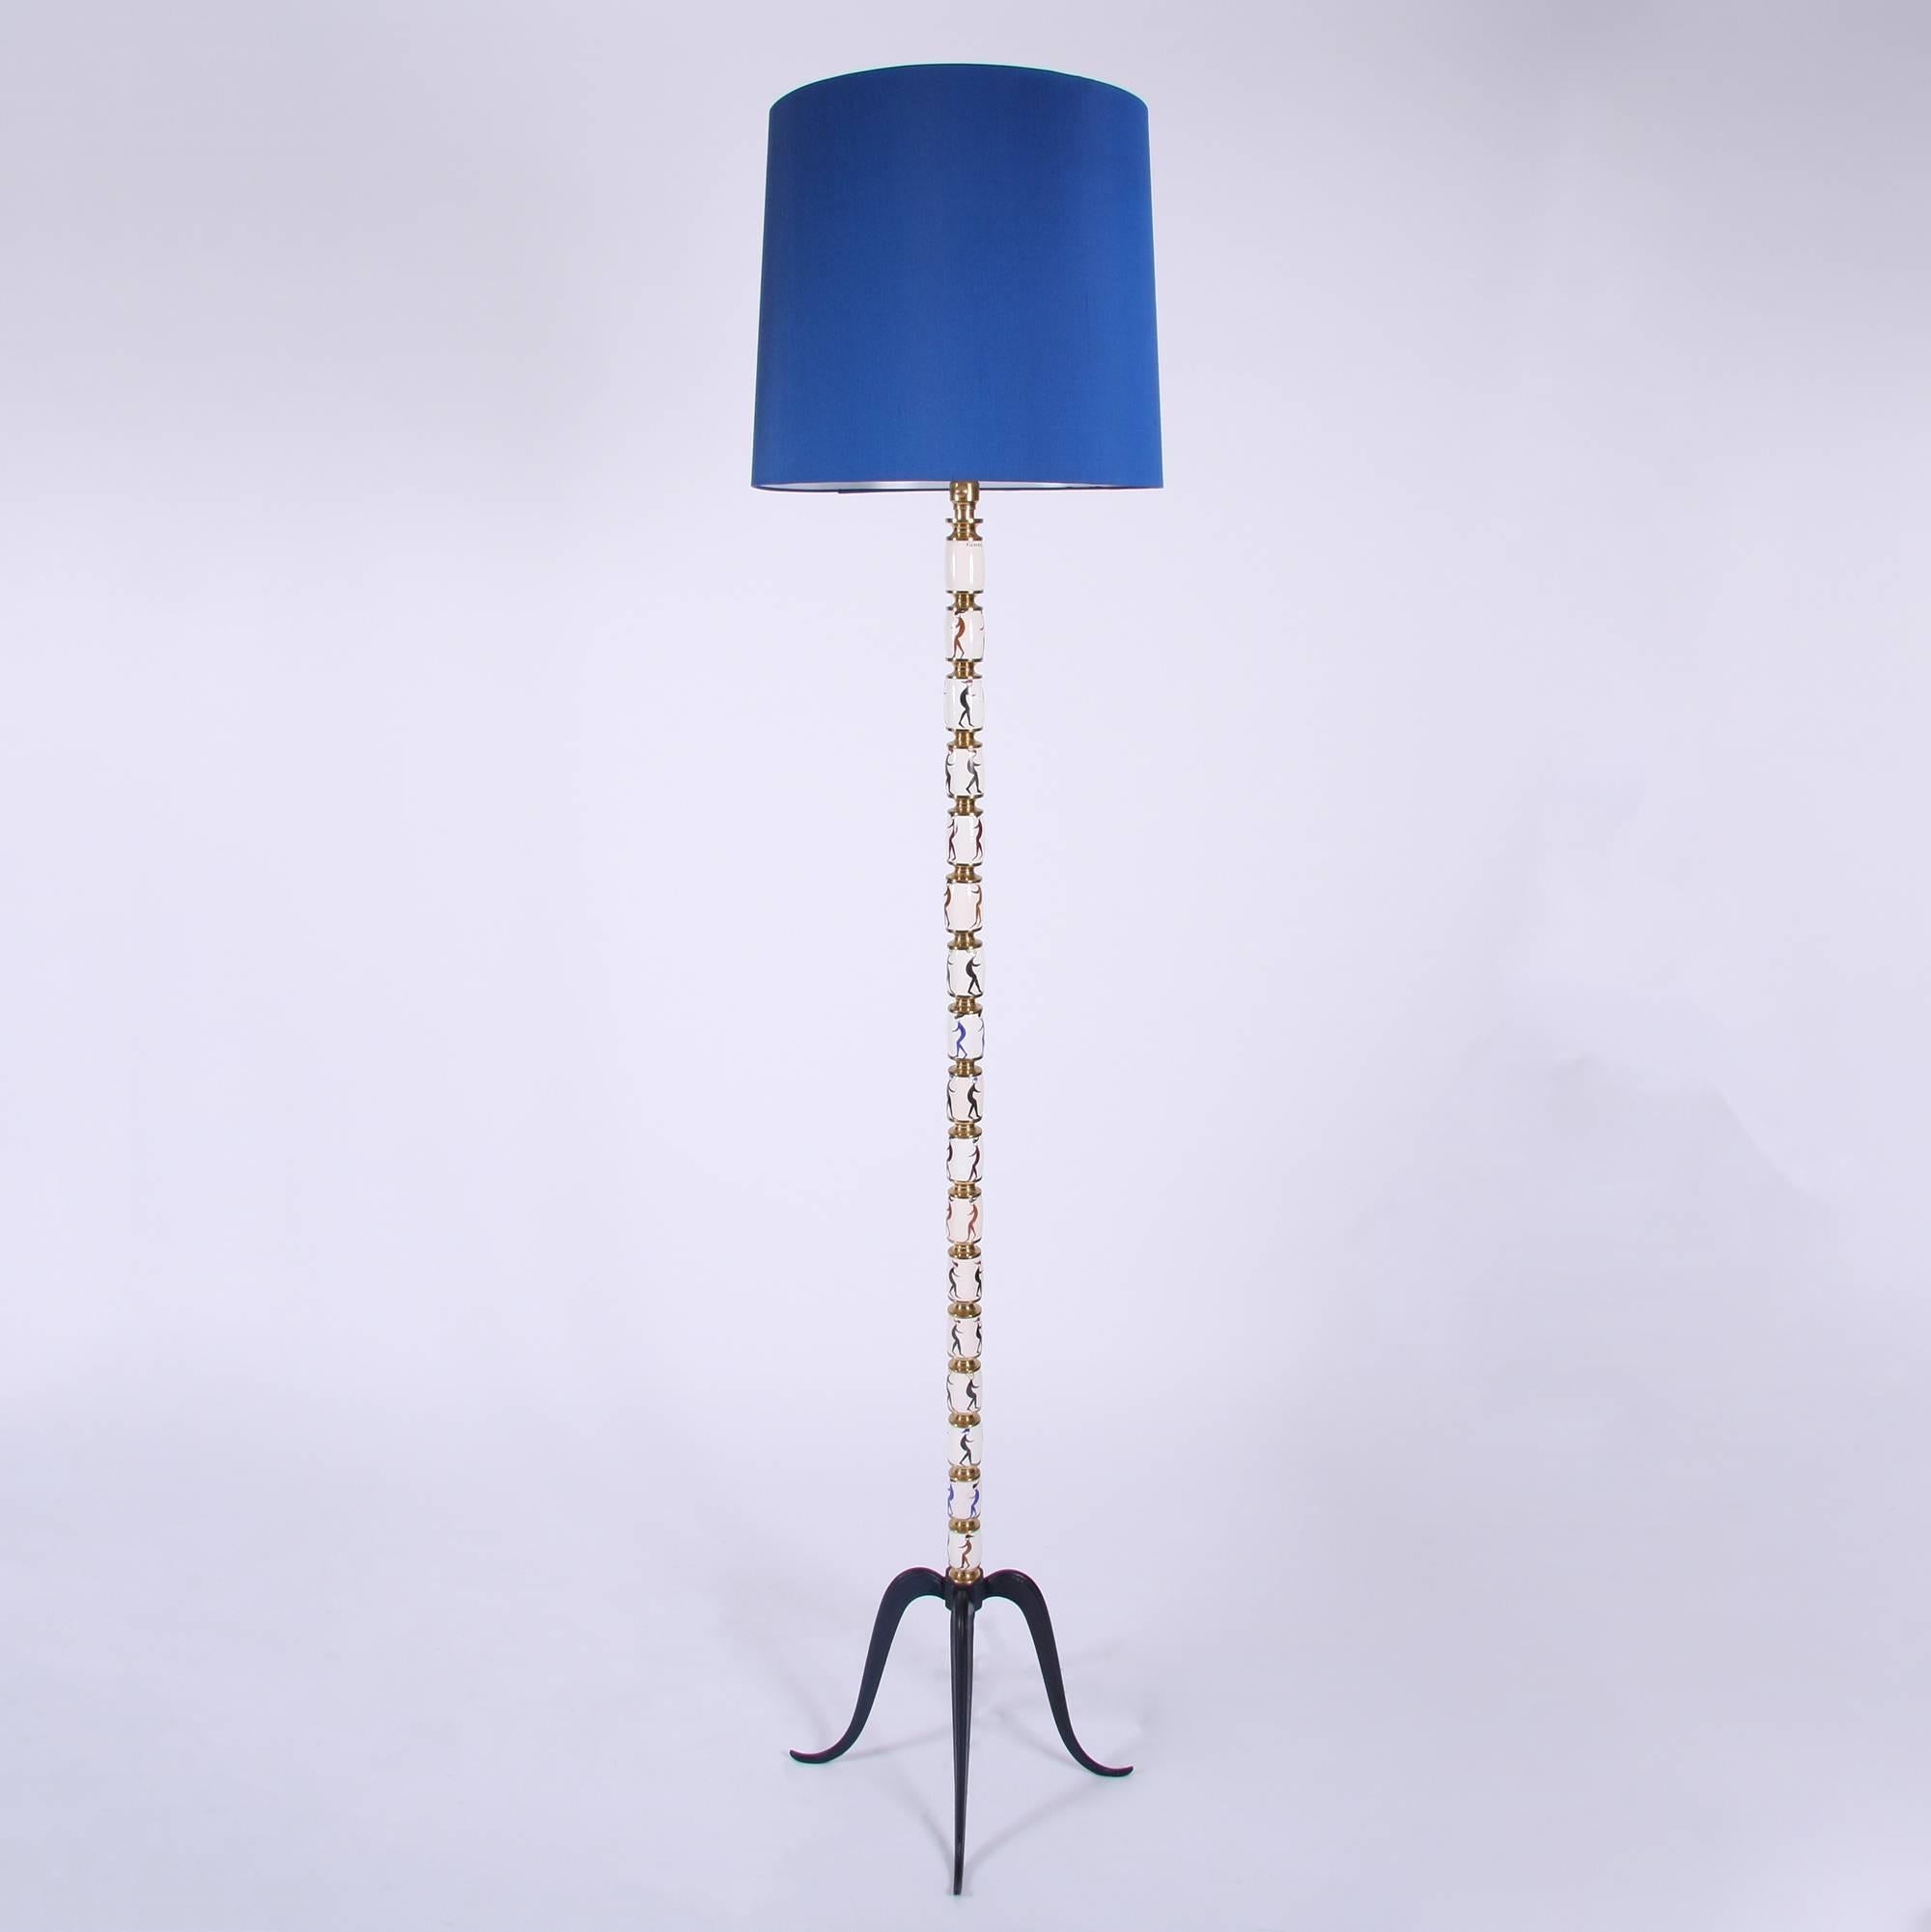 German, circa 1950

Unusual floor lamp with painted ceramic sections. Signed FISBACH G. Dark blue painted serpentine shapes metal base. Height to top of light fitting. Pictured with bespoke handmade silk shade. Re-wired and PAT tested.